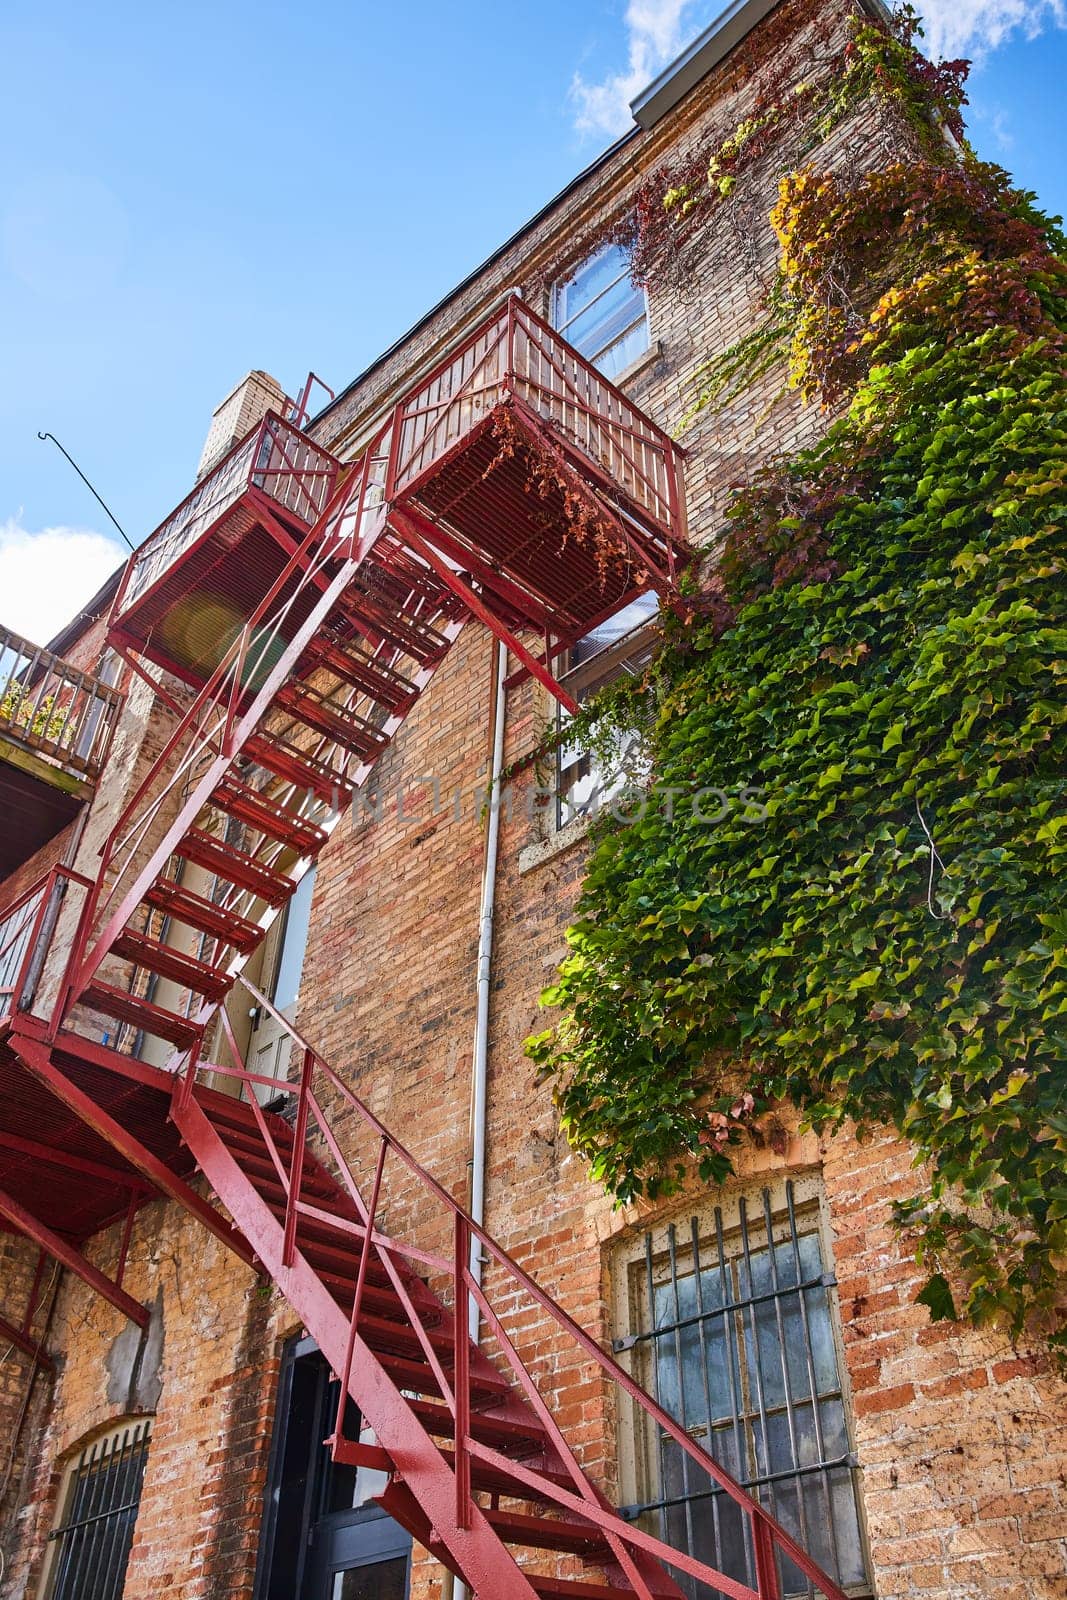 Ivy-Covered Brick Building with Red Fire Escape in Sunlight, Urban Upward View by njproductions